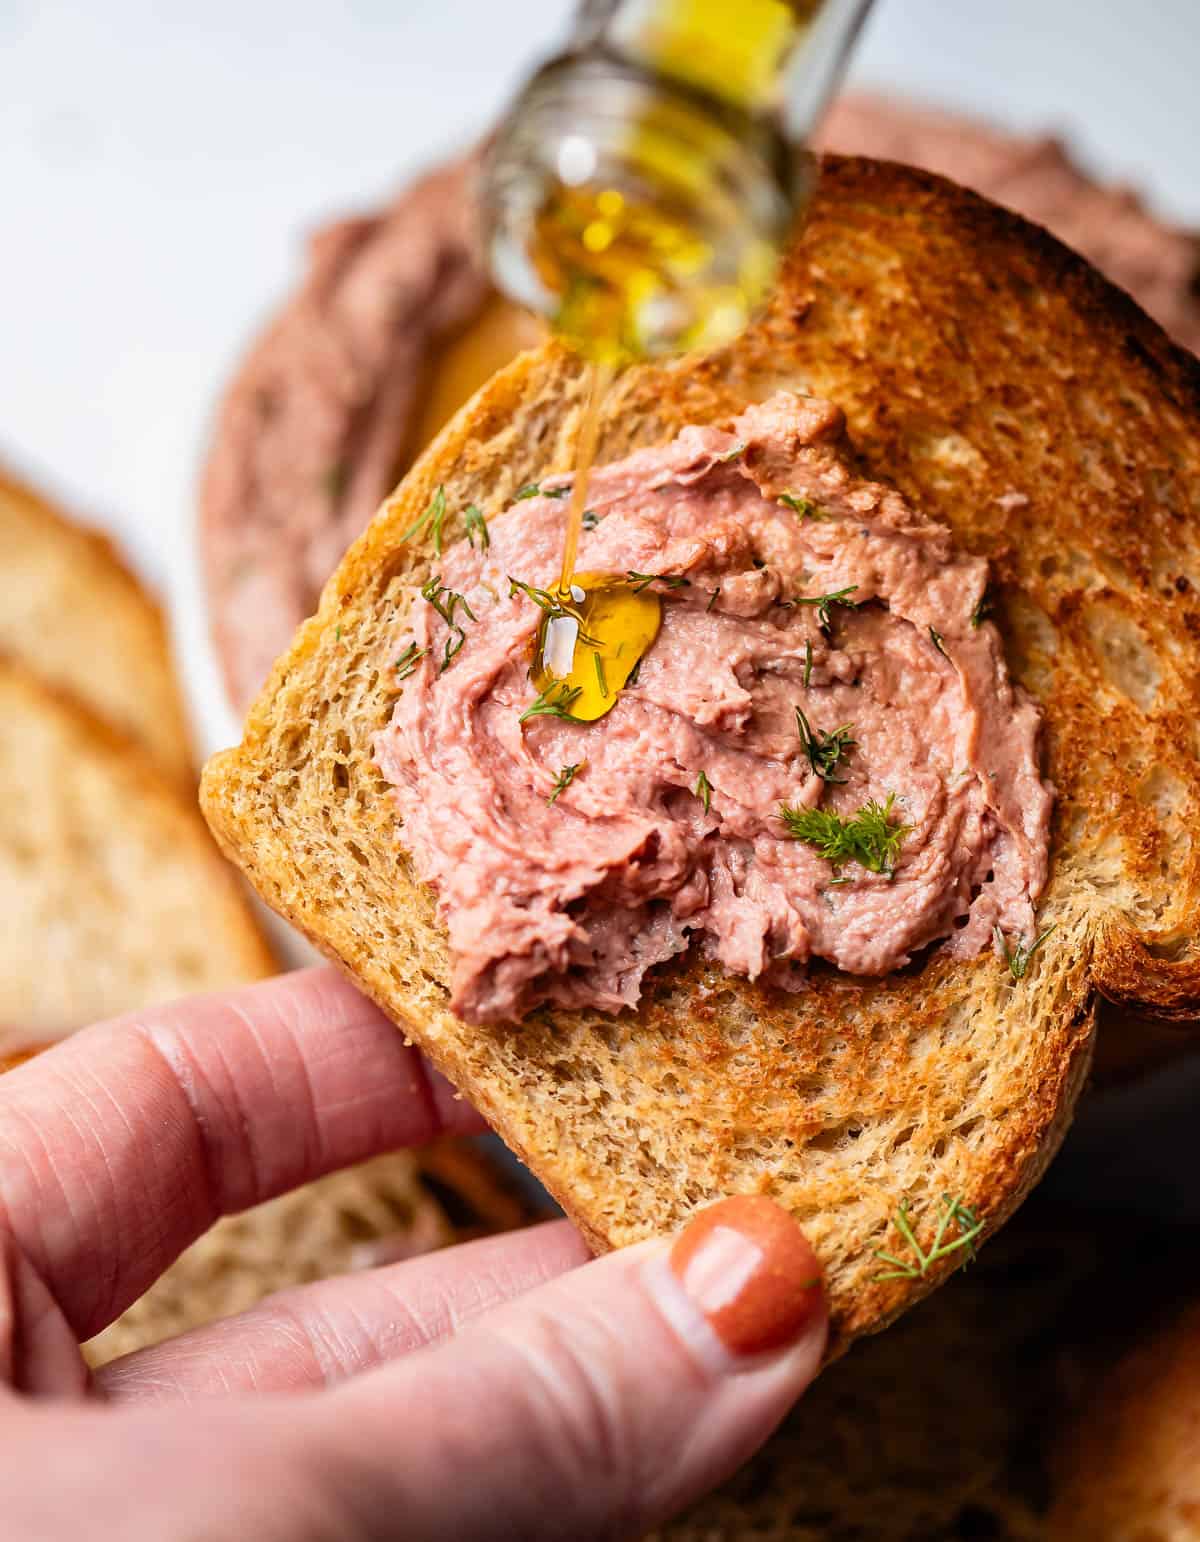 liver pate on toasted rye bread while pouring on olive oil.